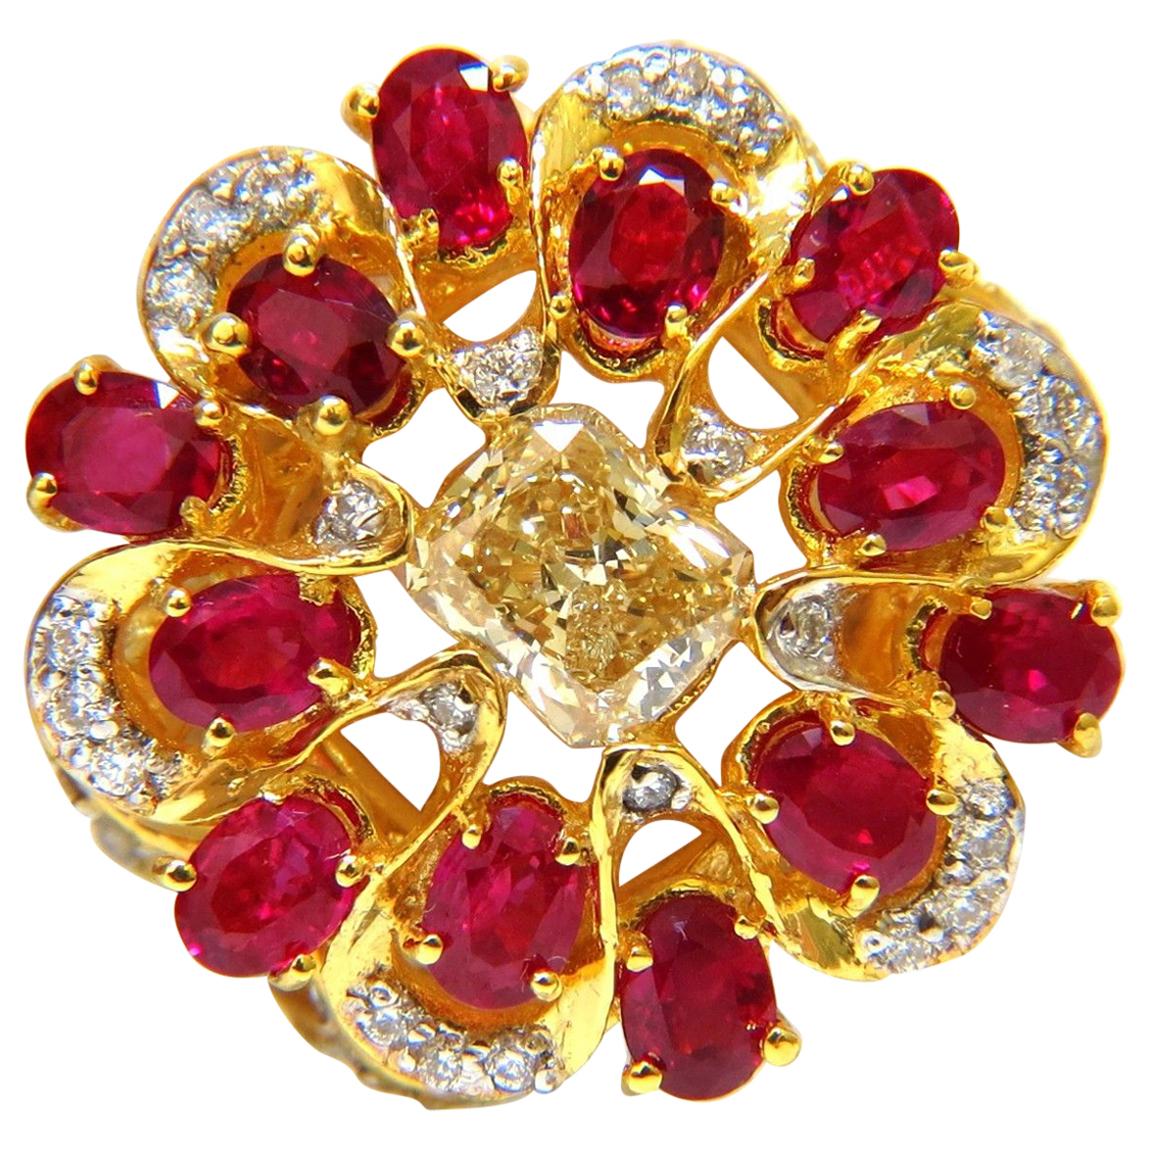 3.44 Carat Natural Fancy Yellow Brown Diamond Ruby Cocktail Cluster Ring